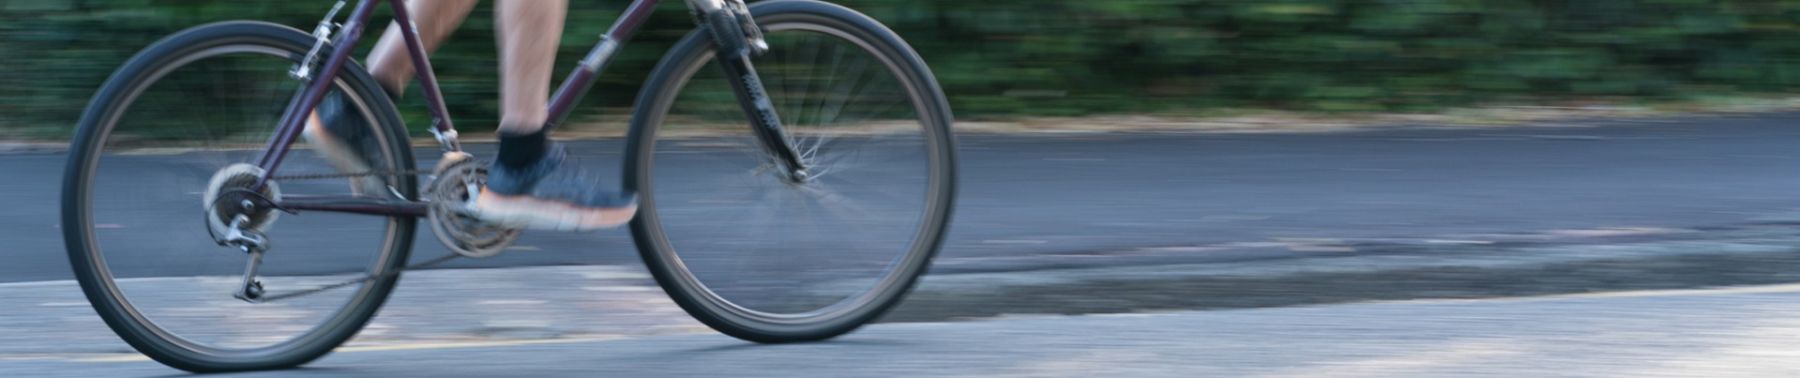 Shine Lawyers | OPINION - Should cyclists pay registration to ride on roads - BANNER